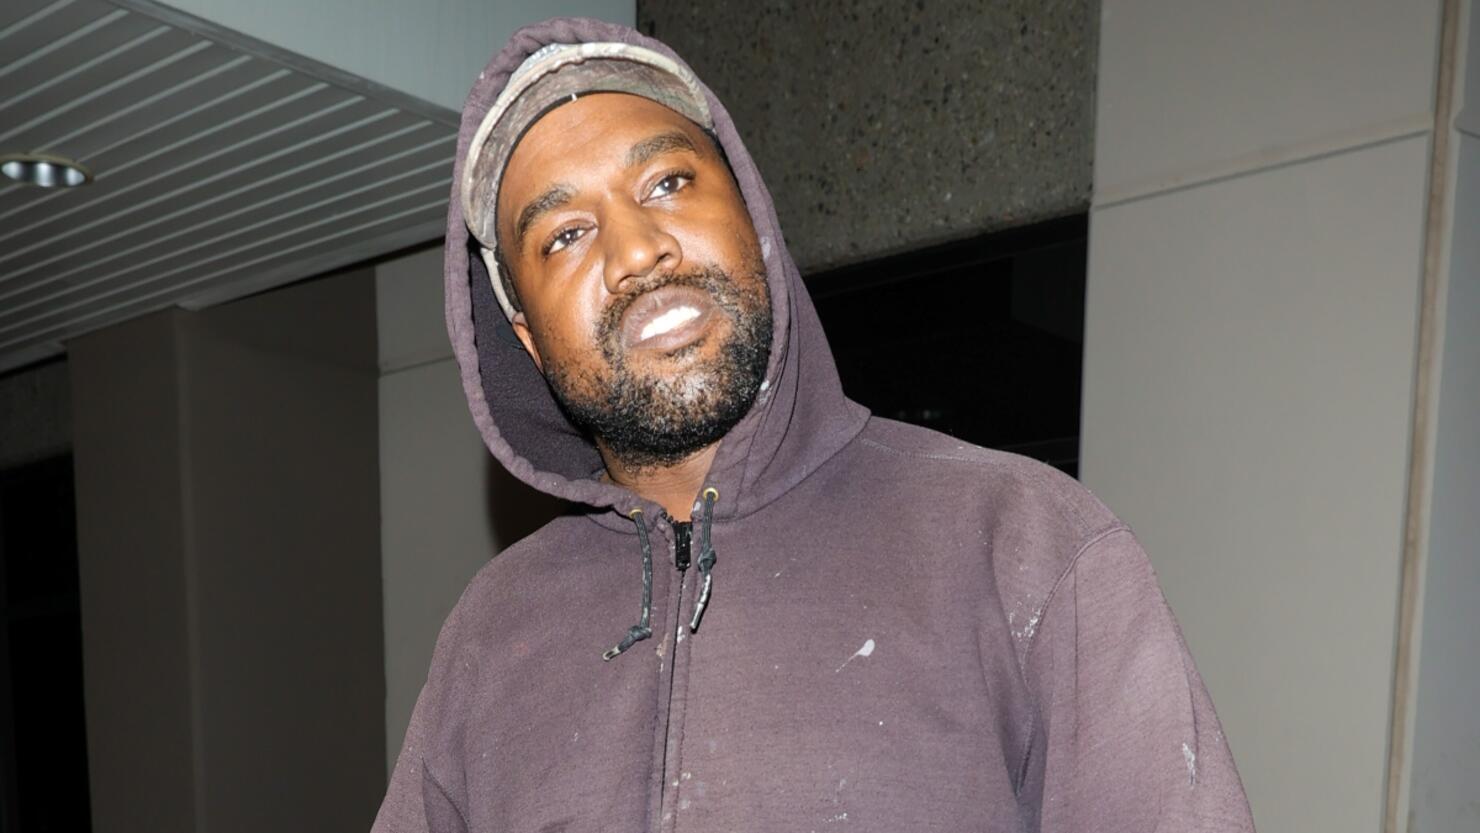 Balenciaga Officially Cuts Ties With Kanye West